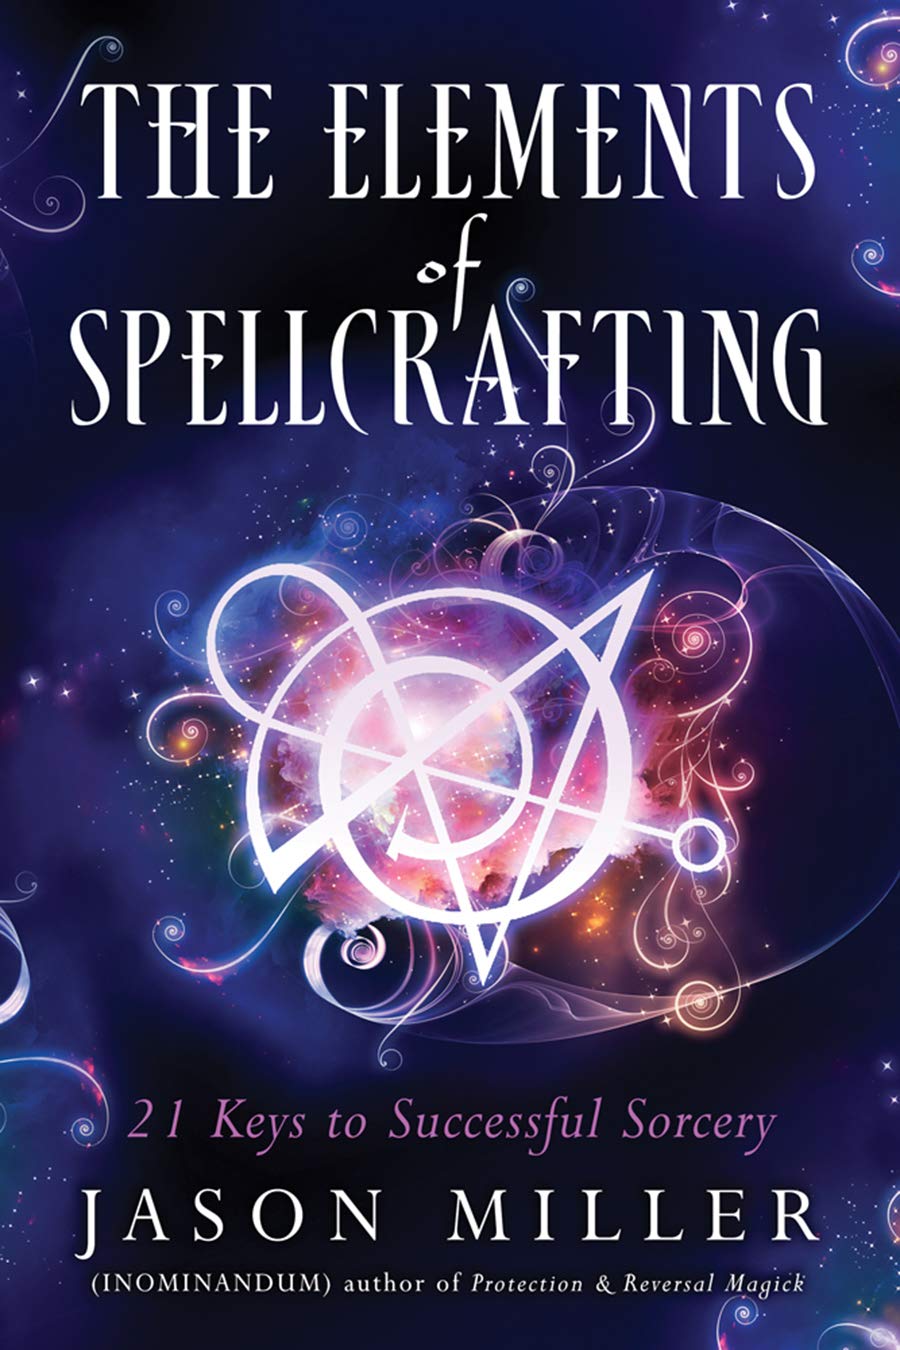 The Elements of Spellcrafting, by Jason Miller